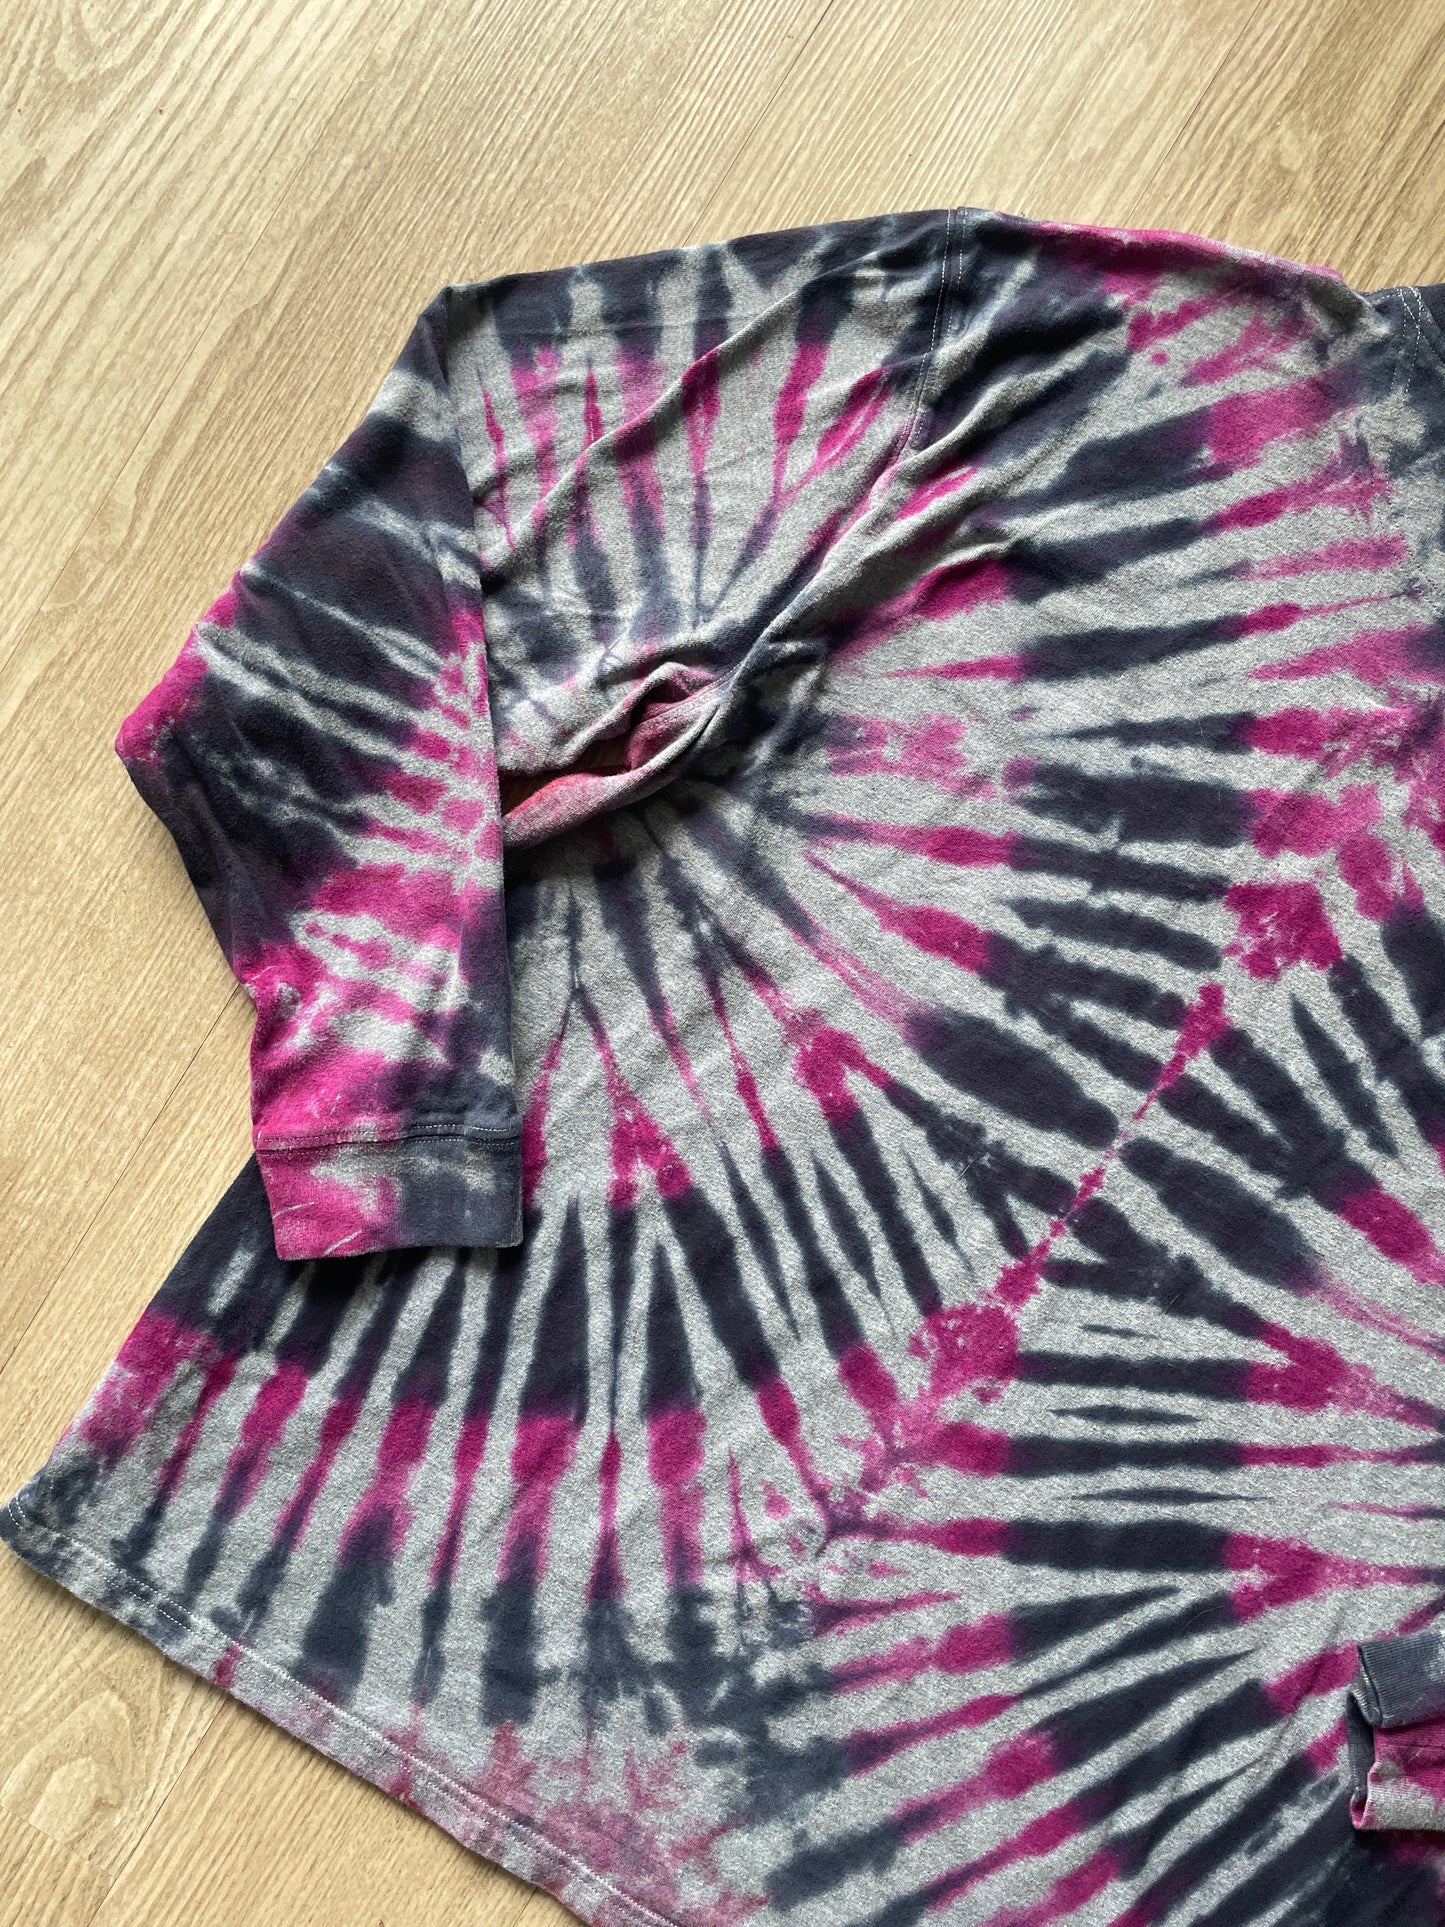 LARGE Men’s Pendleton Woolen Mills Hand-Printed Peace Sign Tie Dye Long Sleeve T-Shirt | One-Of-a-Kind Upcycled Pink and Black Graphic Tee